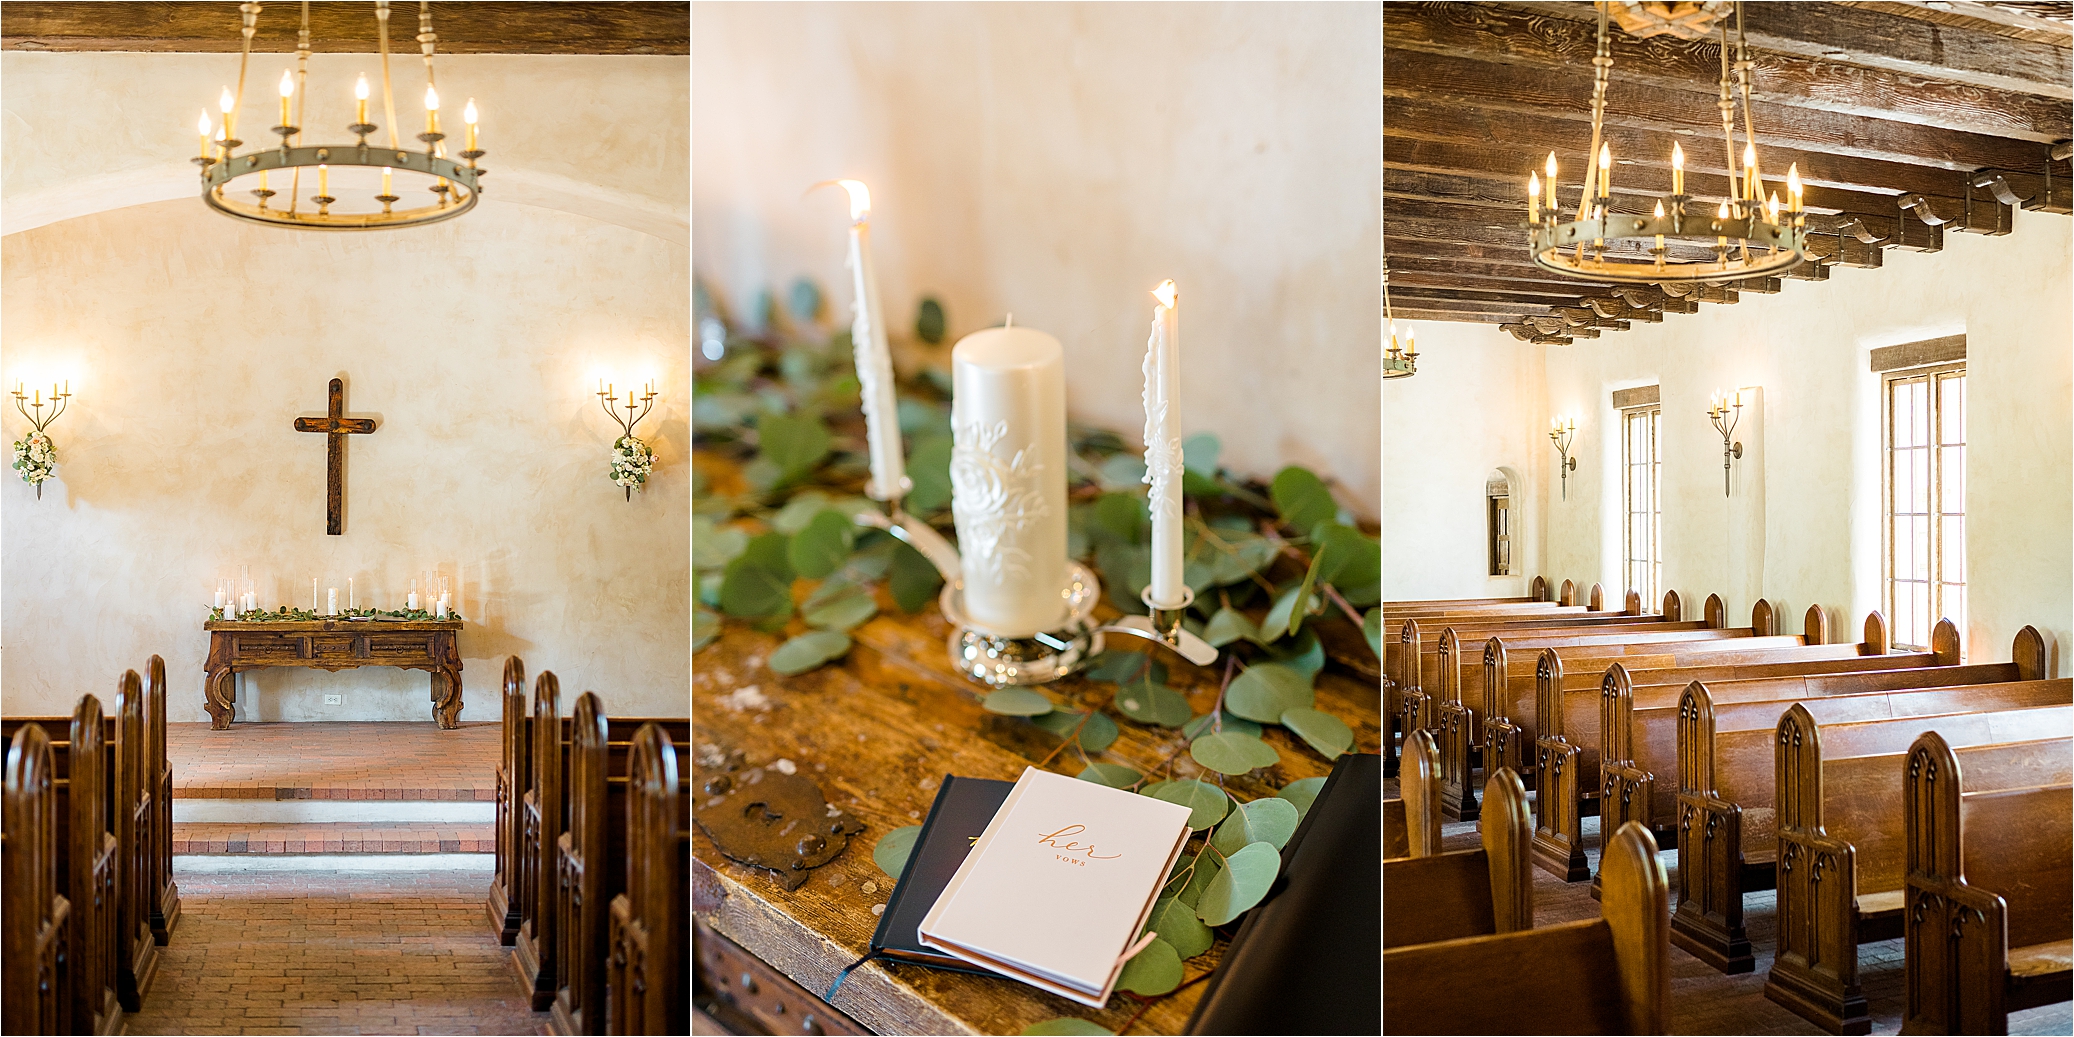 Chapel details at Lost Mission, A Texas Hill Country Wedding Venue near San Antonio, Texas 